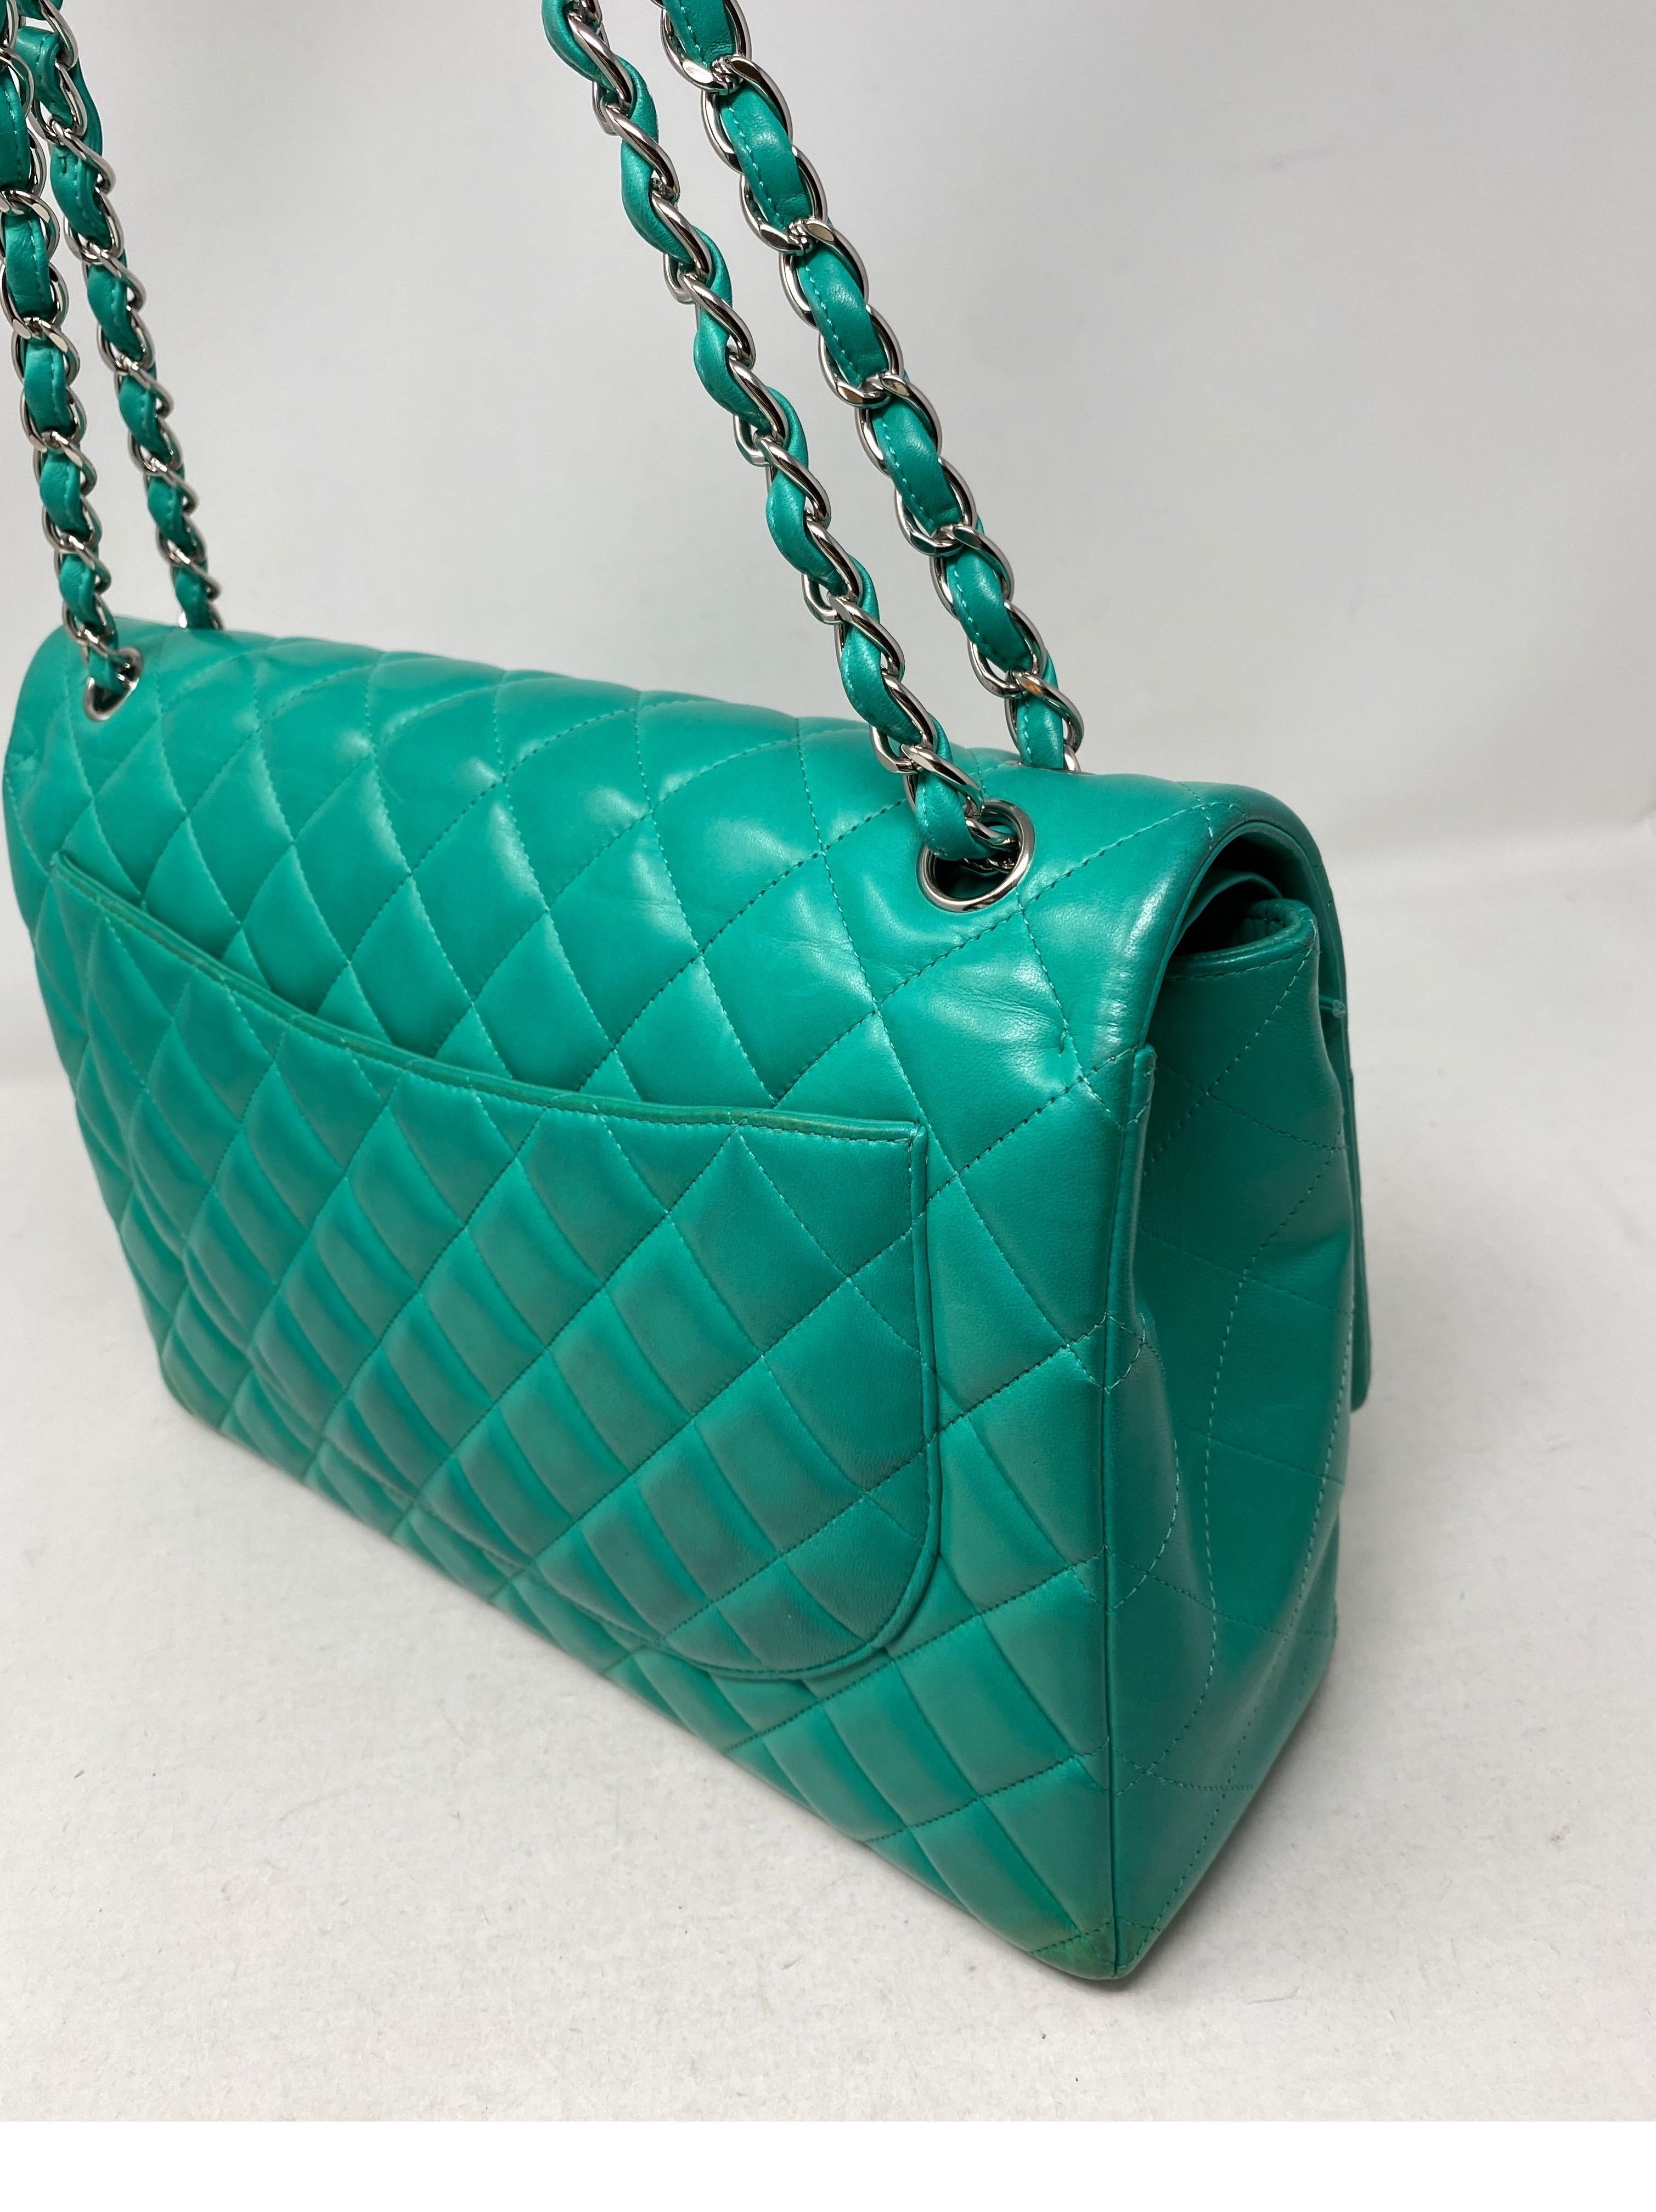 Chanel Teal Maxi Double Flap Bag 6